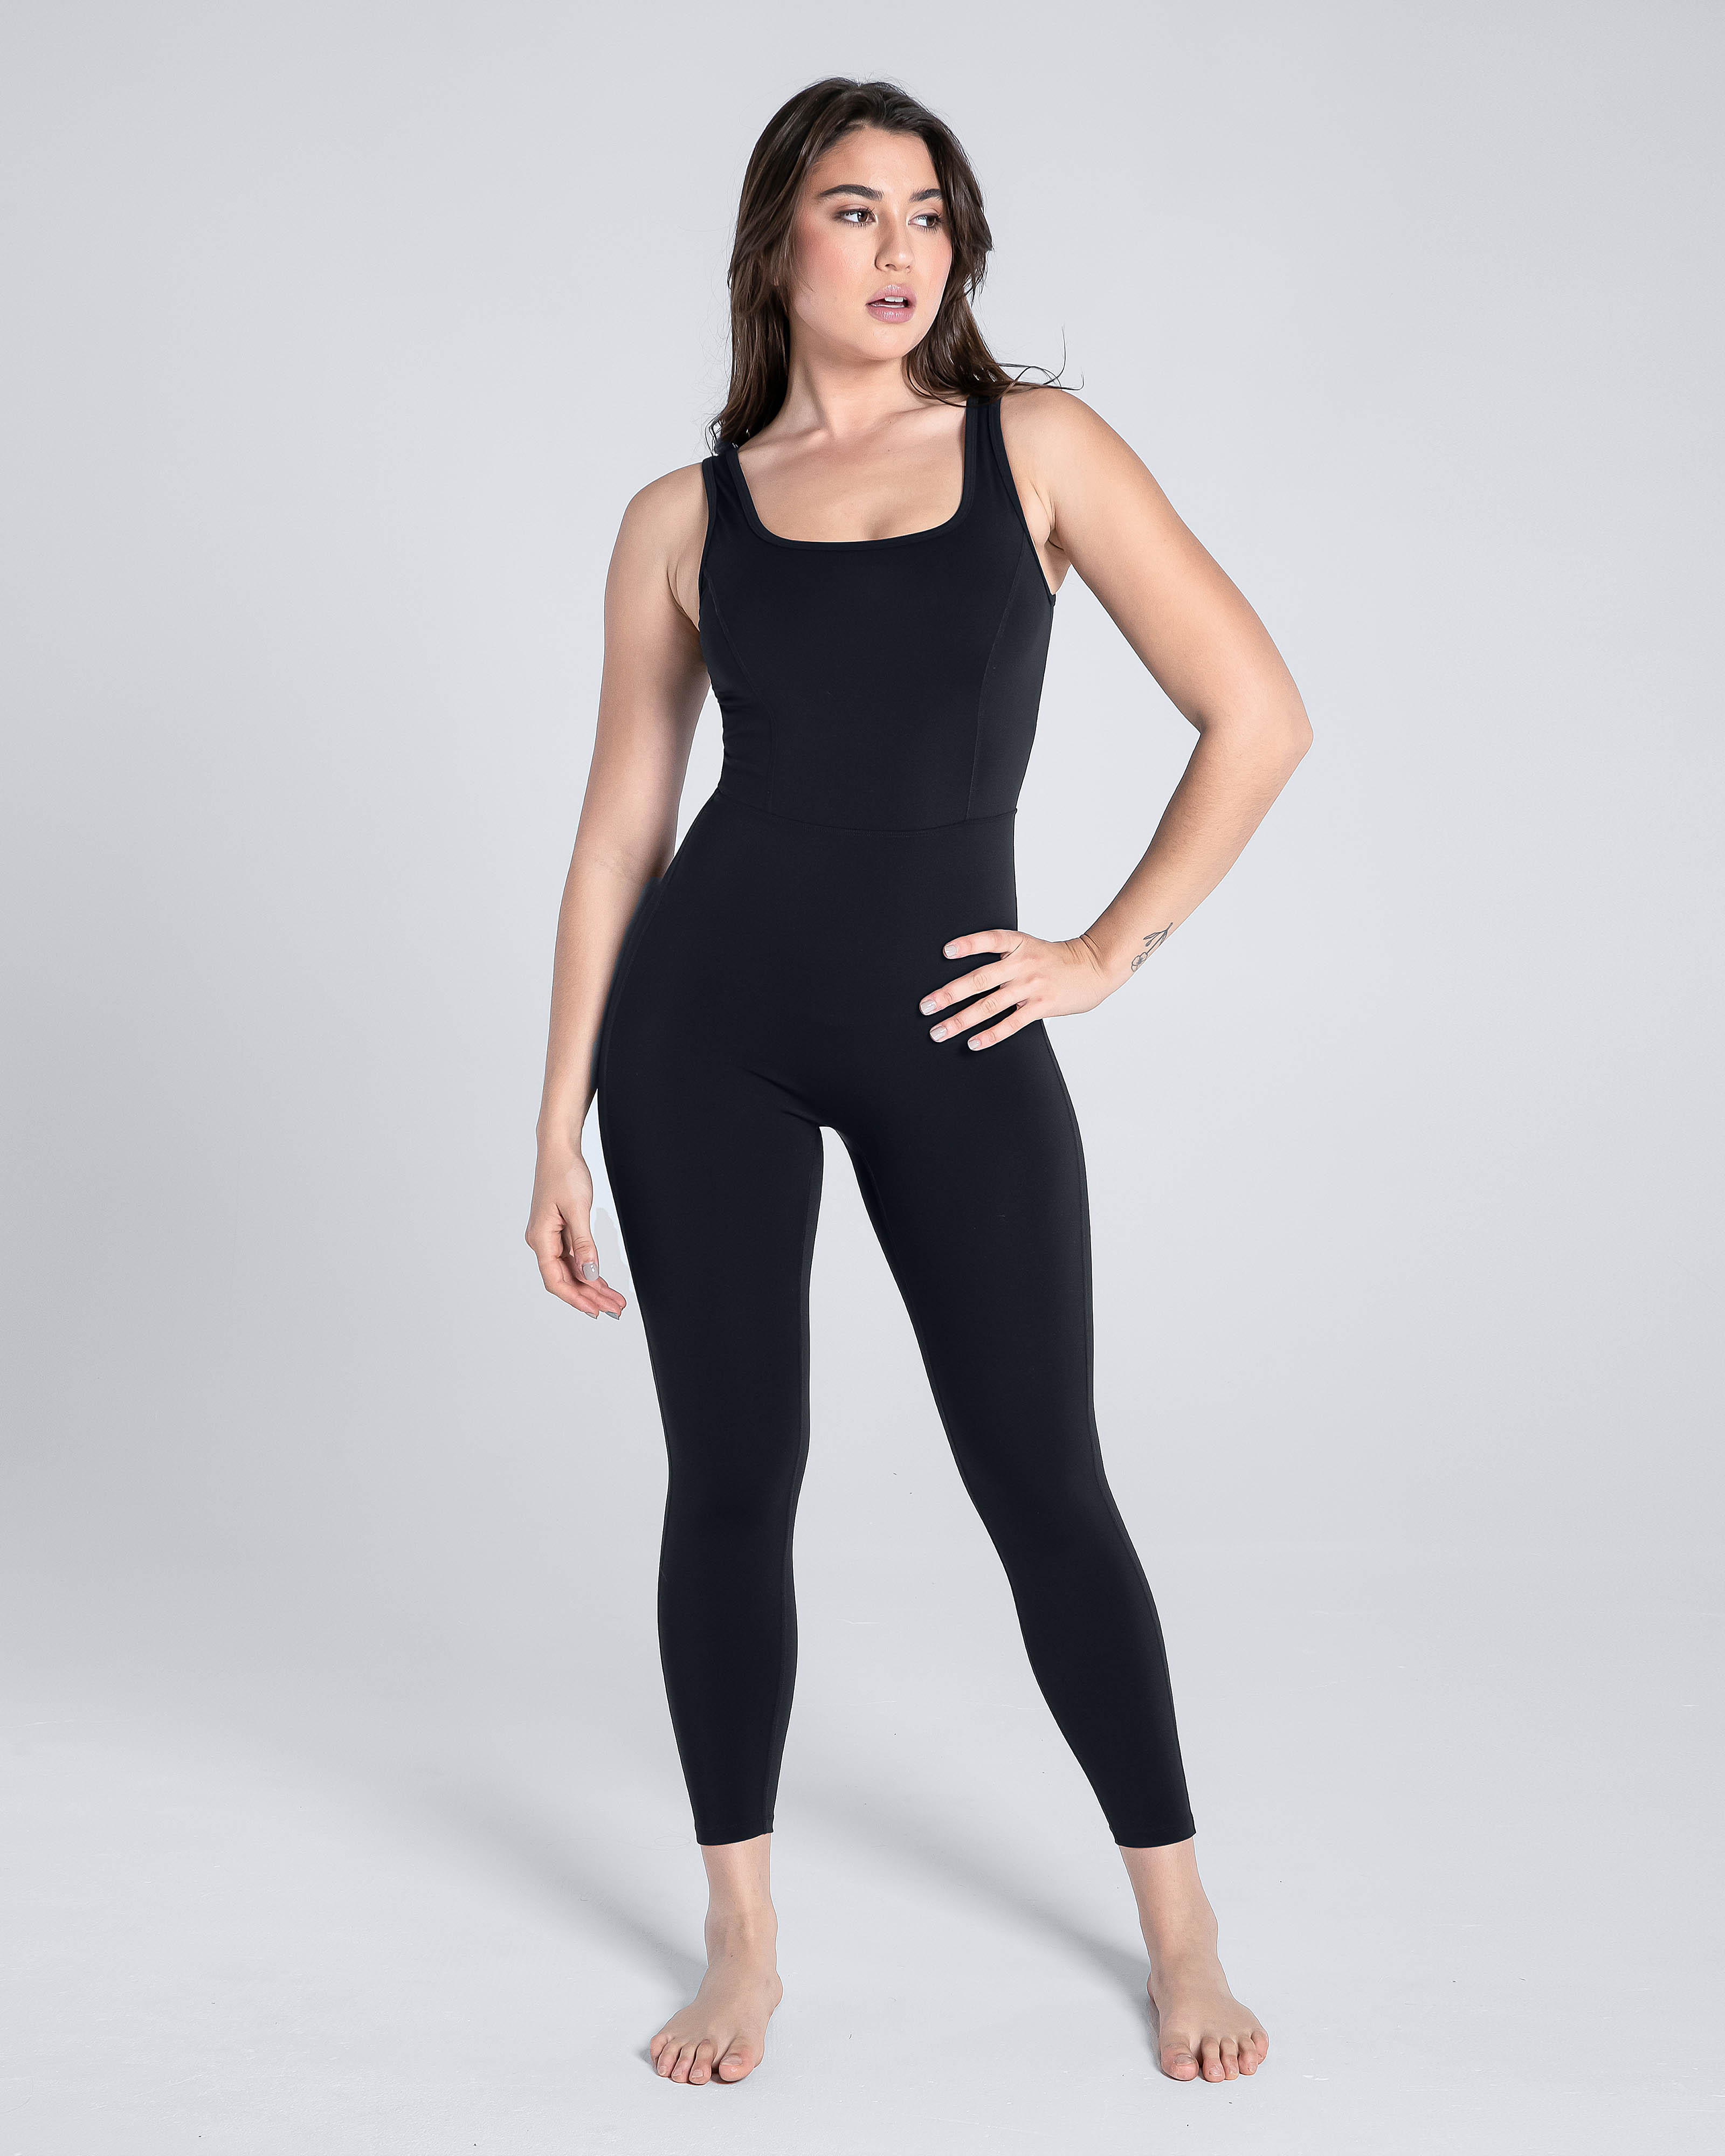 The Best Place to Buy Sportswear for Women – Cosmolle